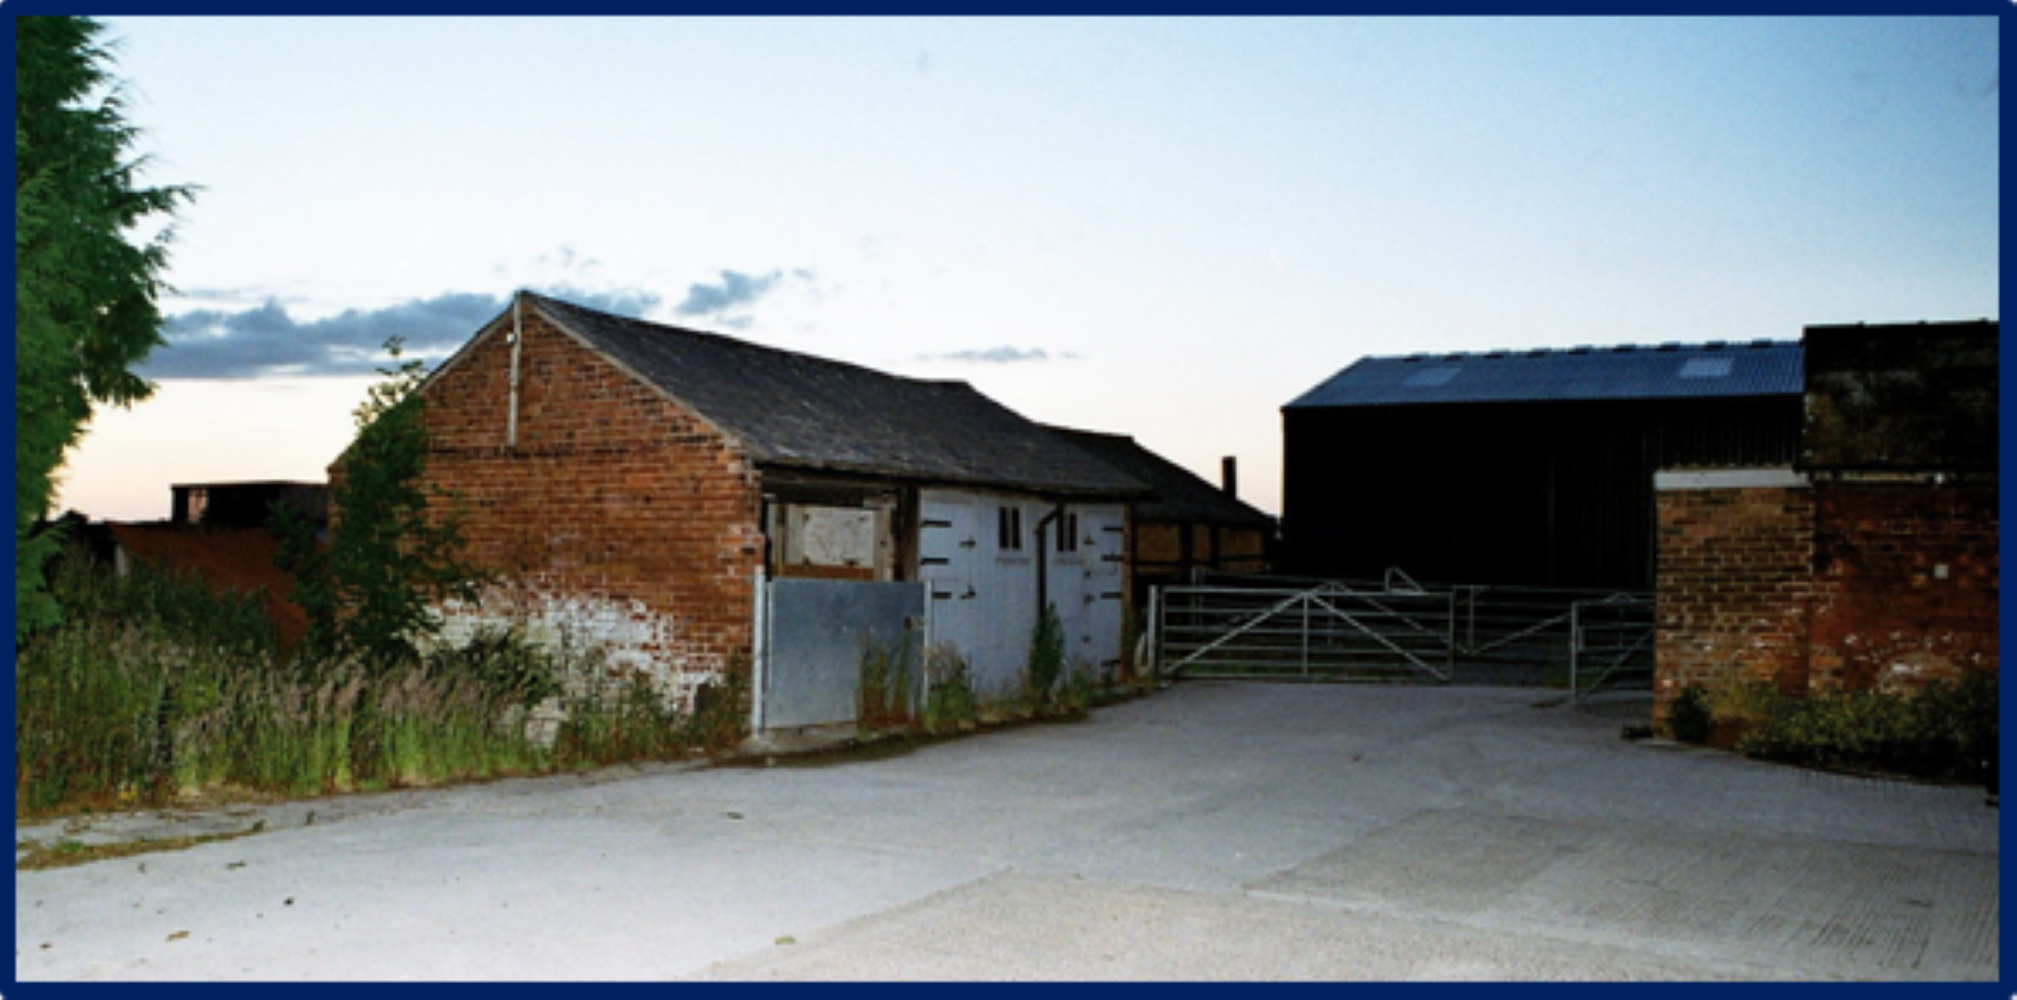 Burnt House Farm in Tabley, Cheshire, where the murder took place (Cheshire Police/PA)